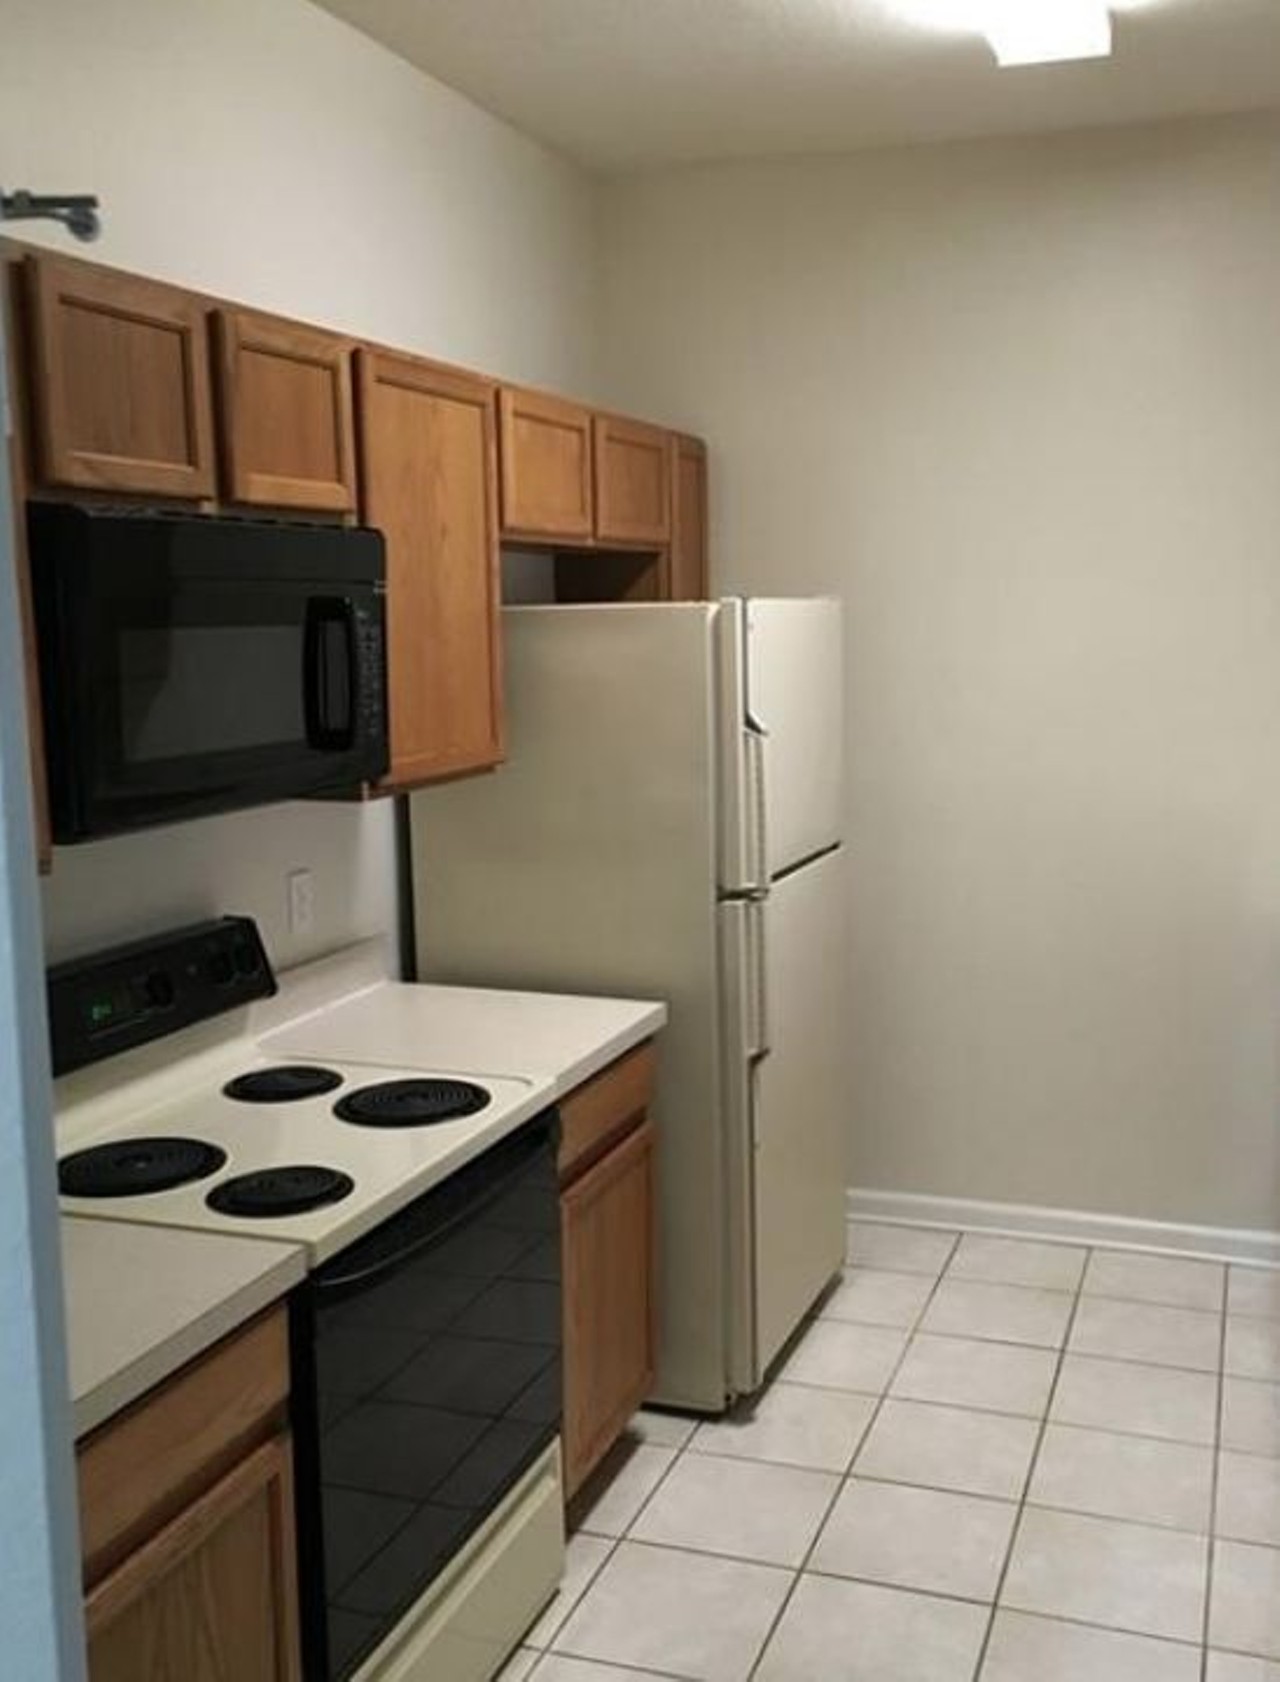 7123 Yacht Basin Ave, Orlando
$1,250/mo
2 bed, 2 bath, 1,050 sqft
Nothing fancy about this kitchen. It's utility only and will allow you to cook up whatever you need.